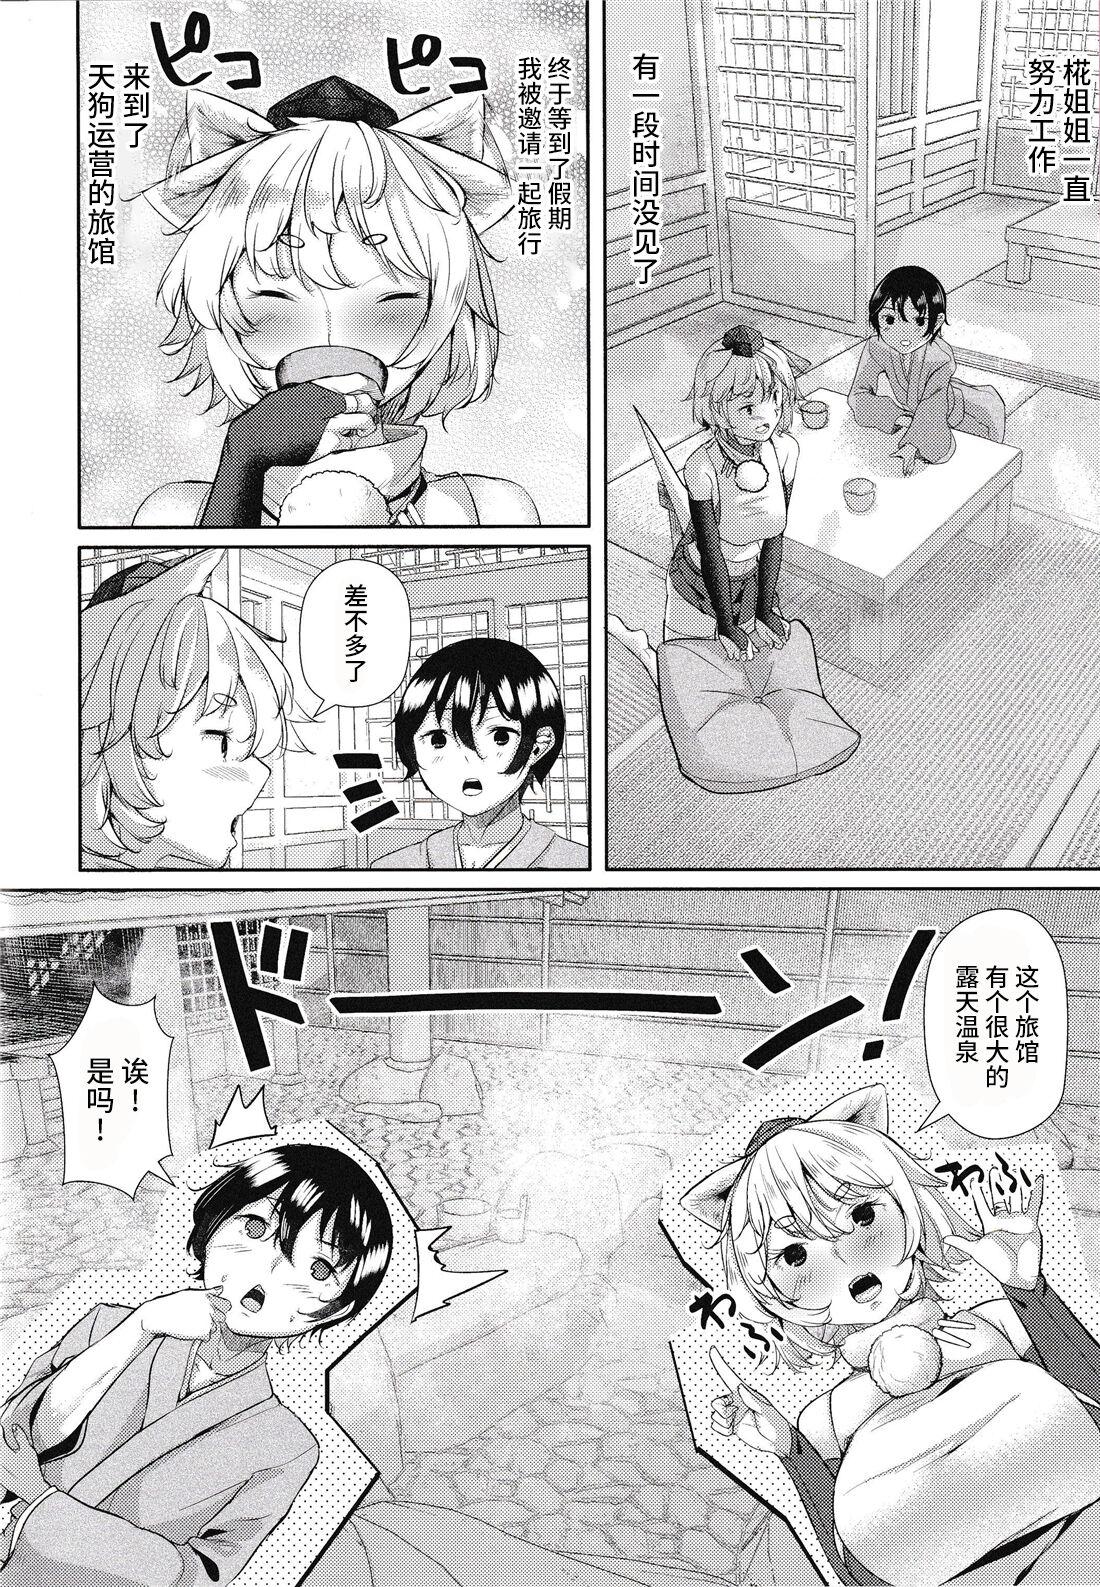 Friend 犬のお姉ちゃんと温泉旅行 - Touhou project Young Petite Porn - Page 4